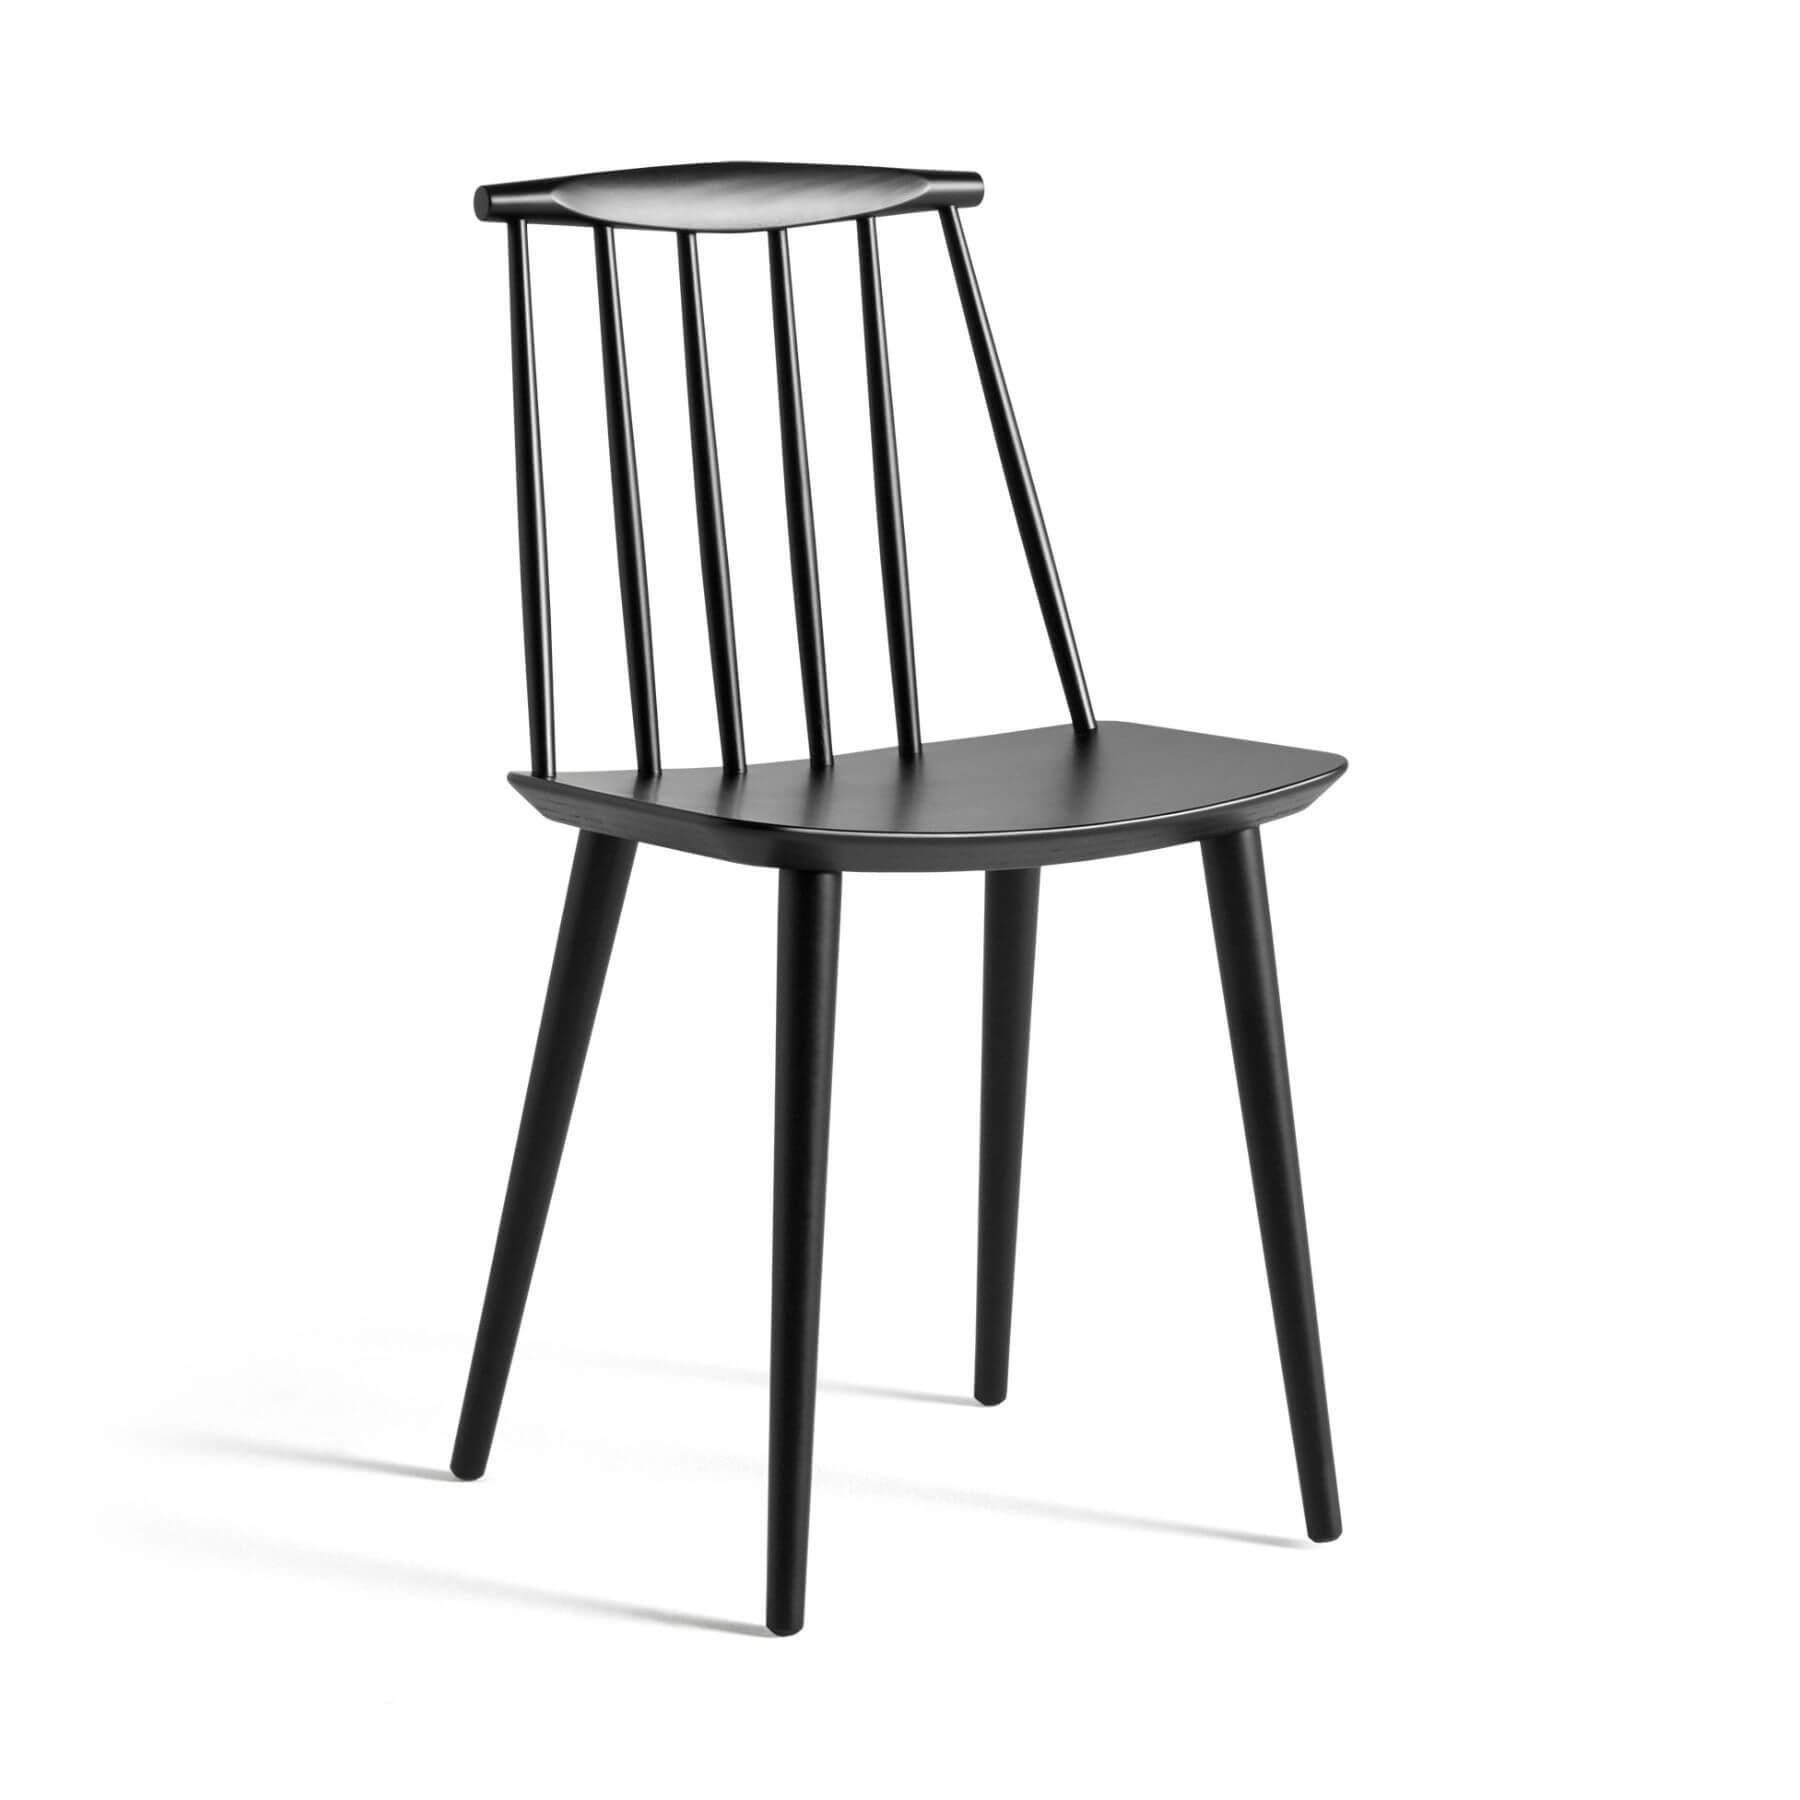 Hay Jseries 77 Dining Chair Beech Lacquered Black Standard Gliders Designer Furniture From Holloways Of Ludlow